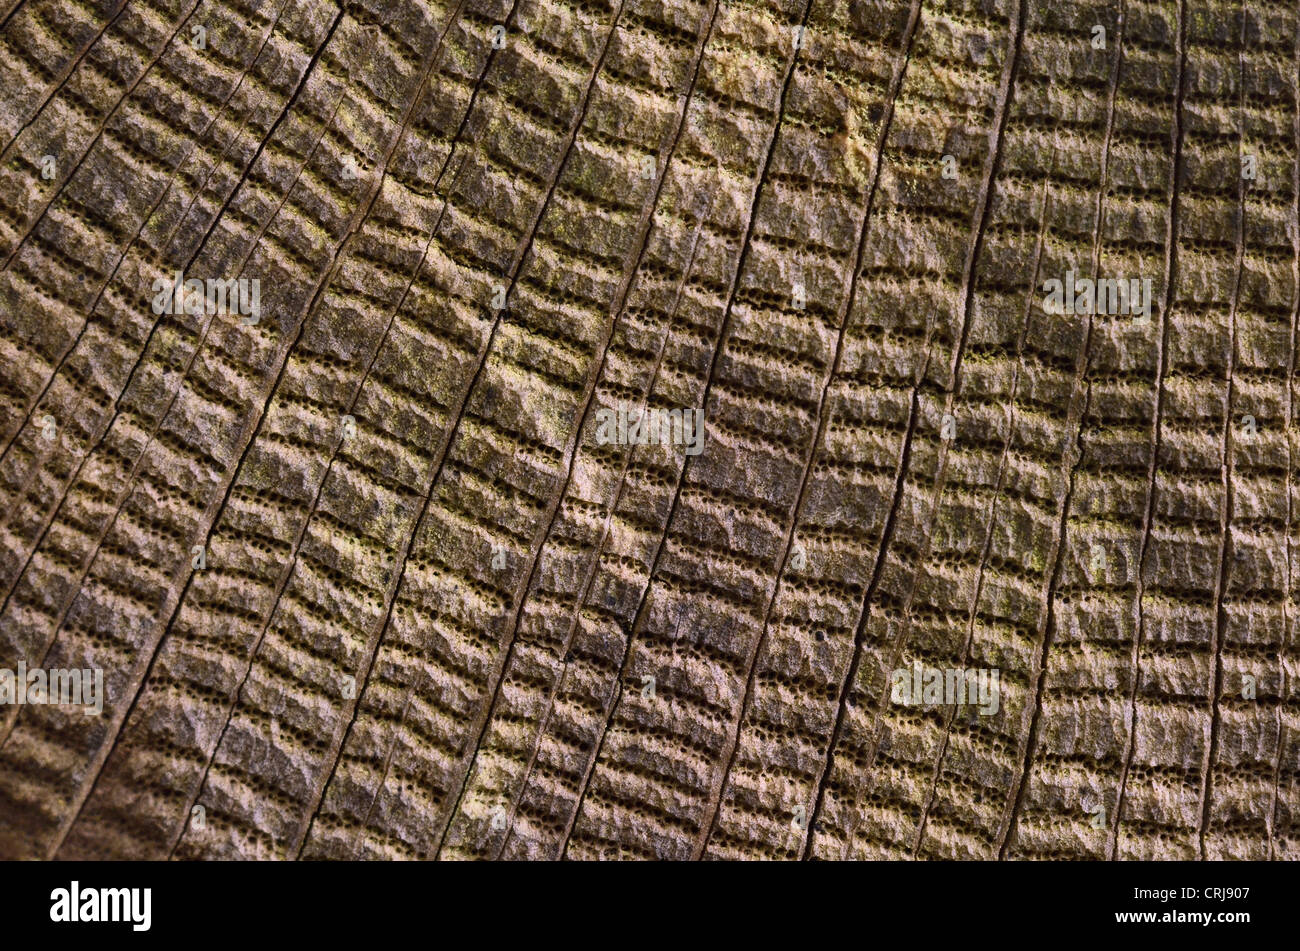 Close detail of weathered tree trunk, showing radial arrangement of decayed xylem / phloem channels. Stock Photo